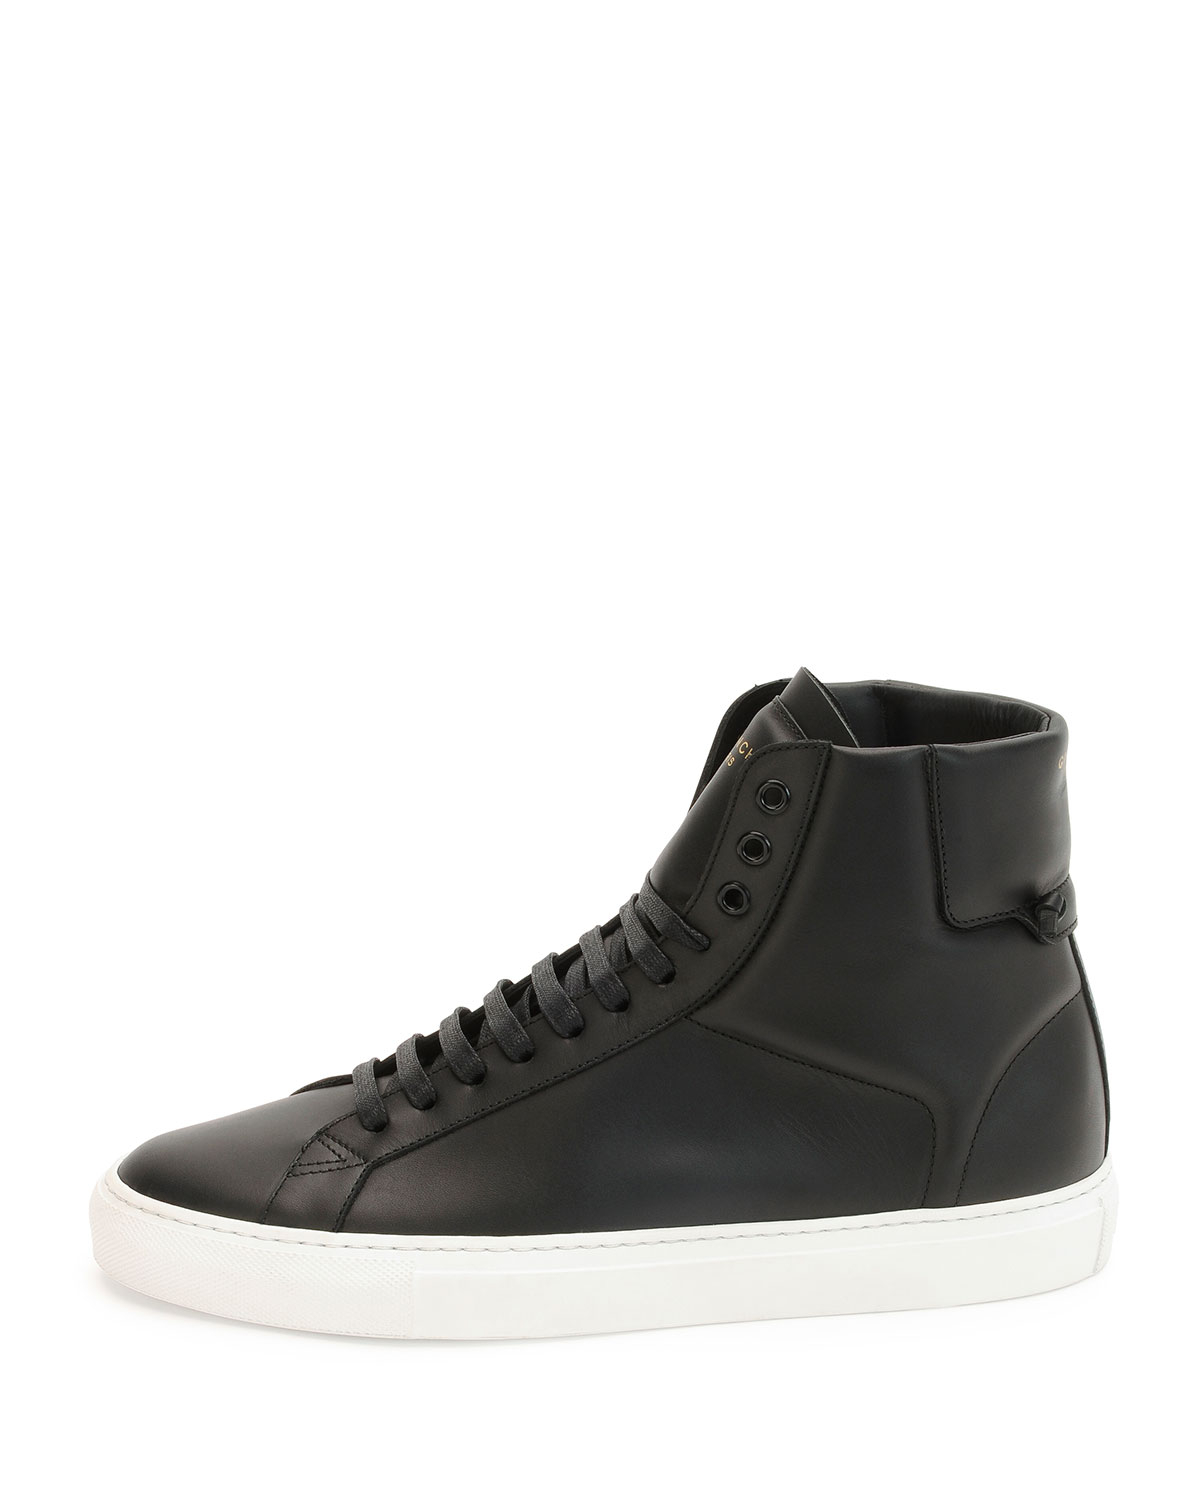 Givenchy Urban Street High-top Sneaker in White - Lyst